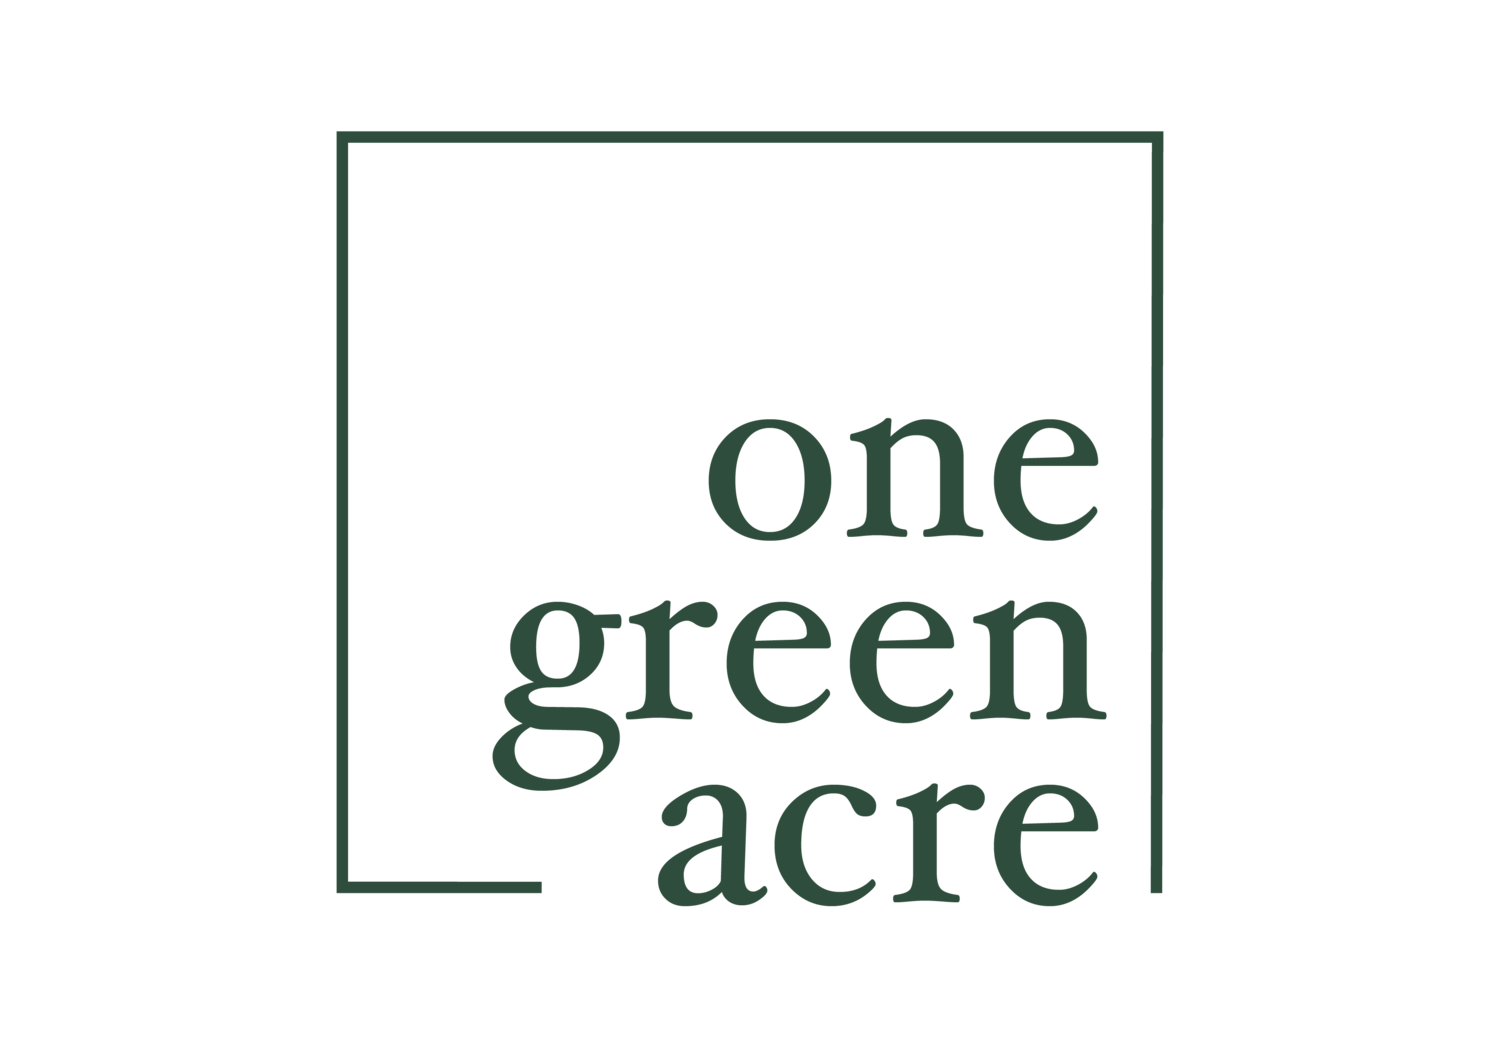 One Green Acre